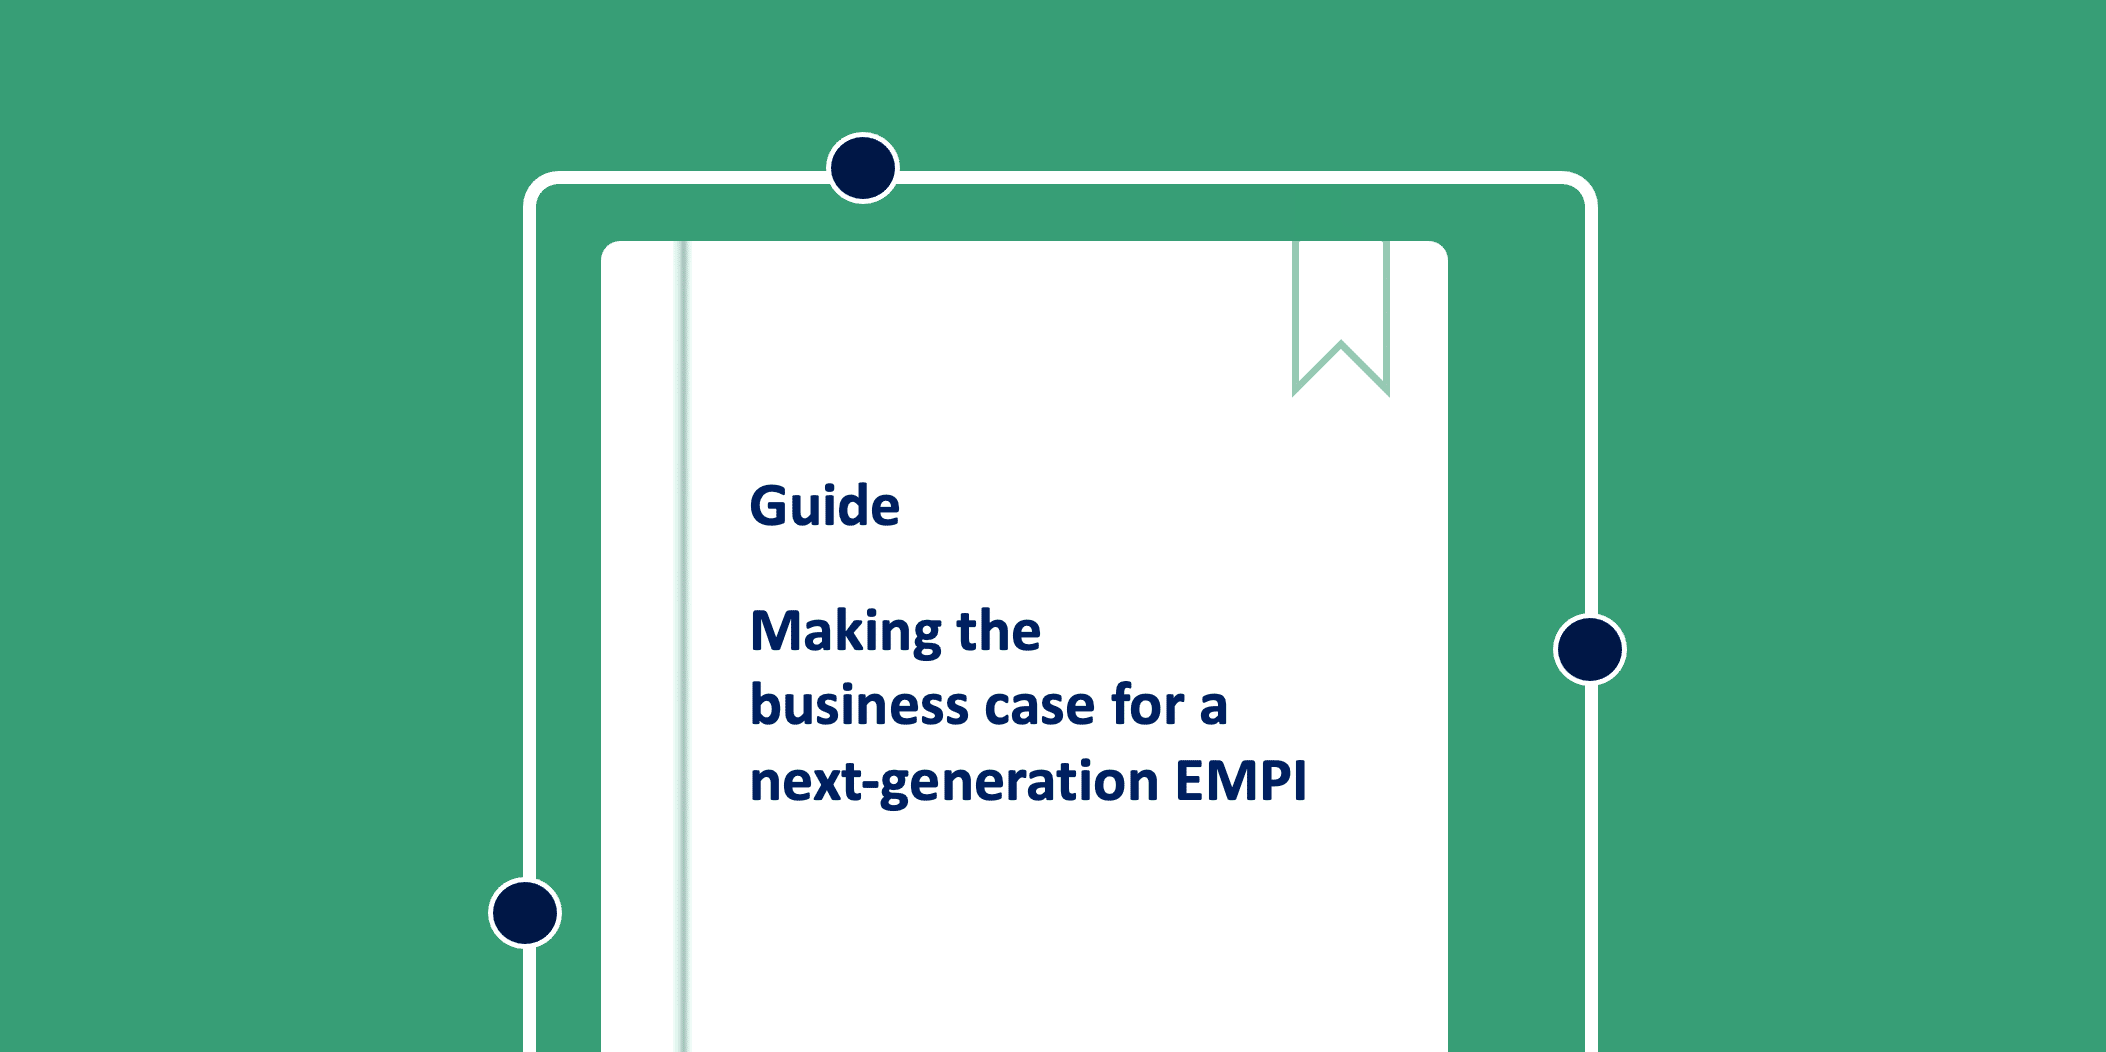 Guide: Making the business case for a next-generation EMPI